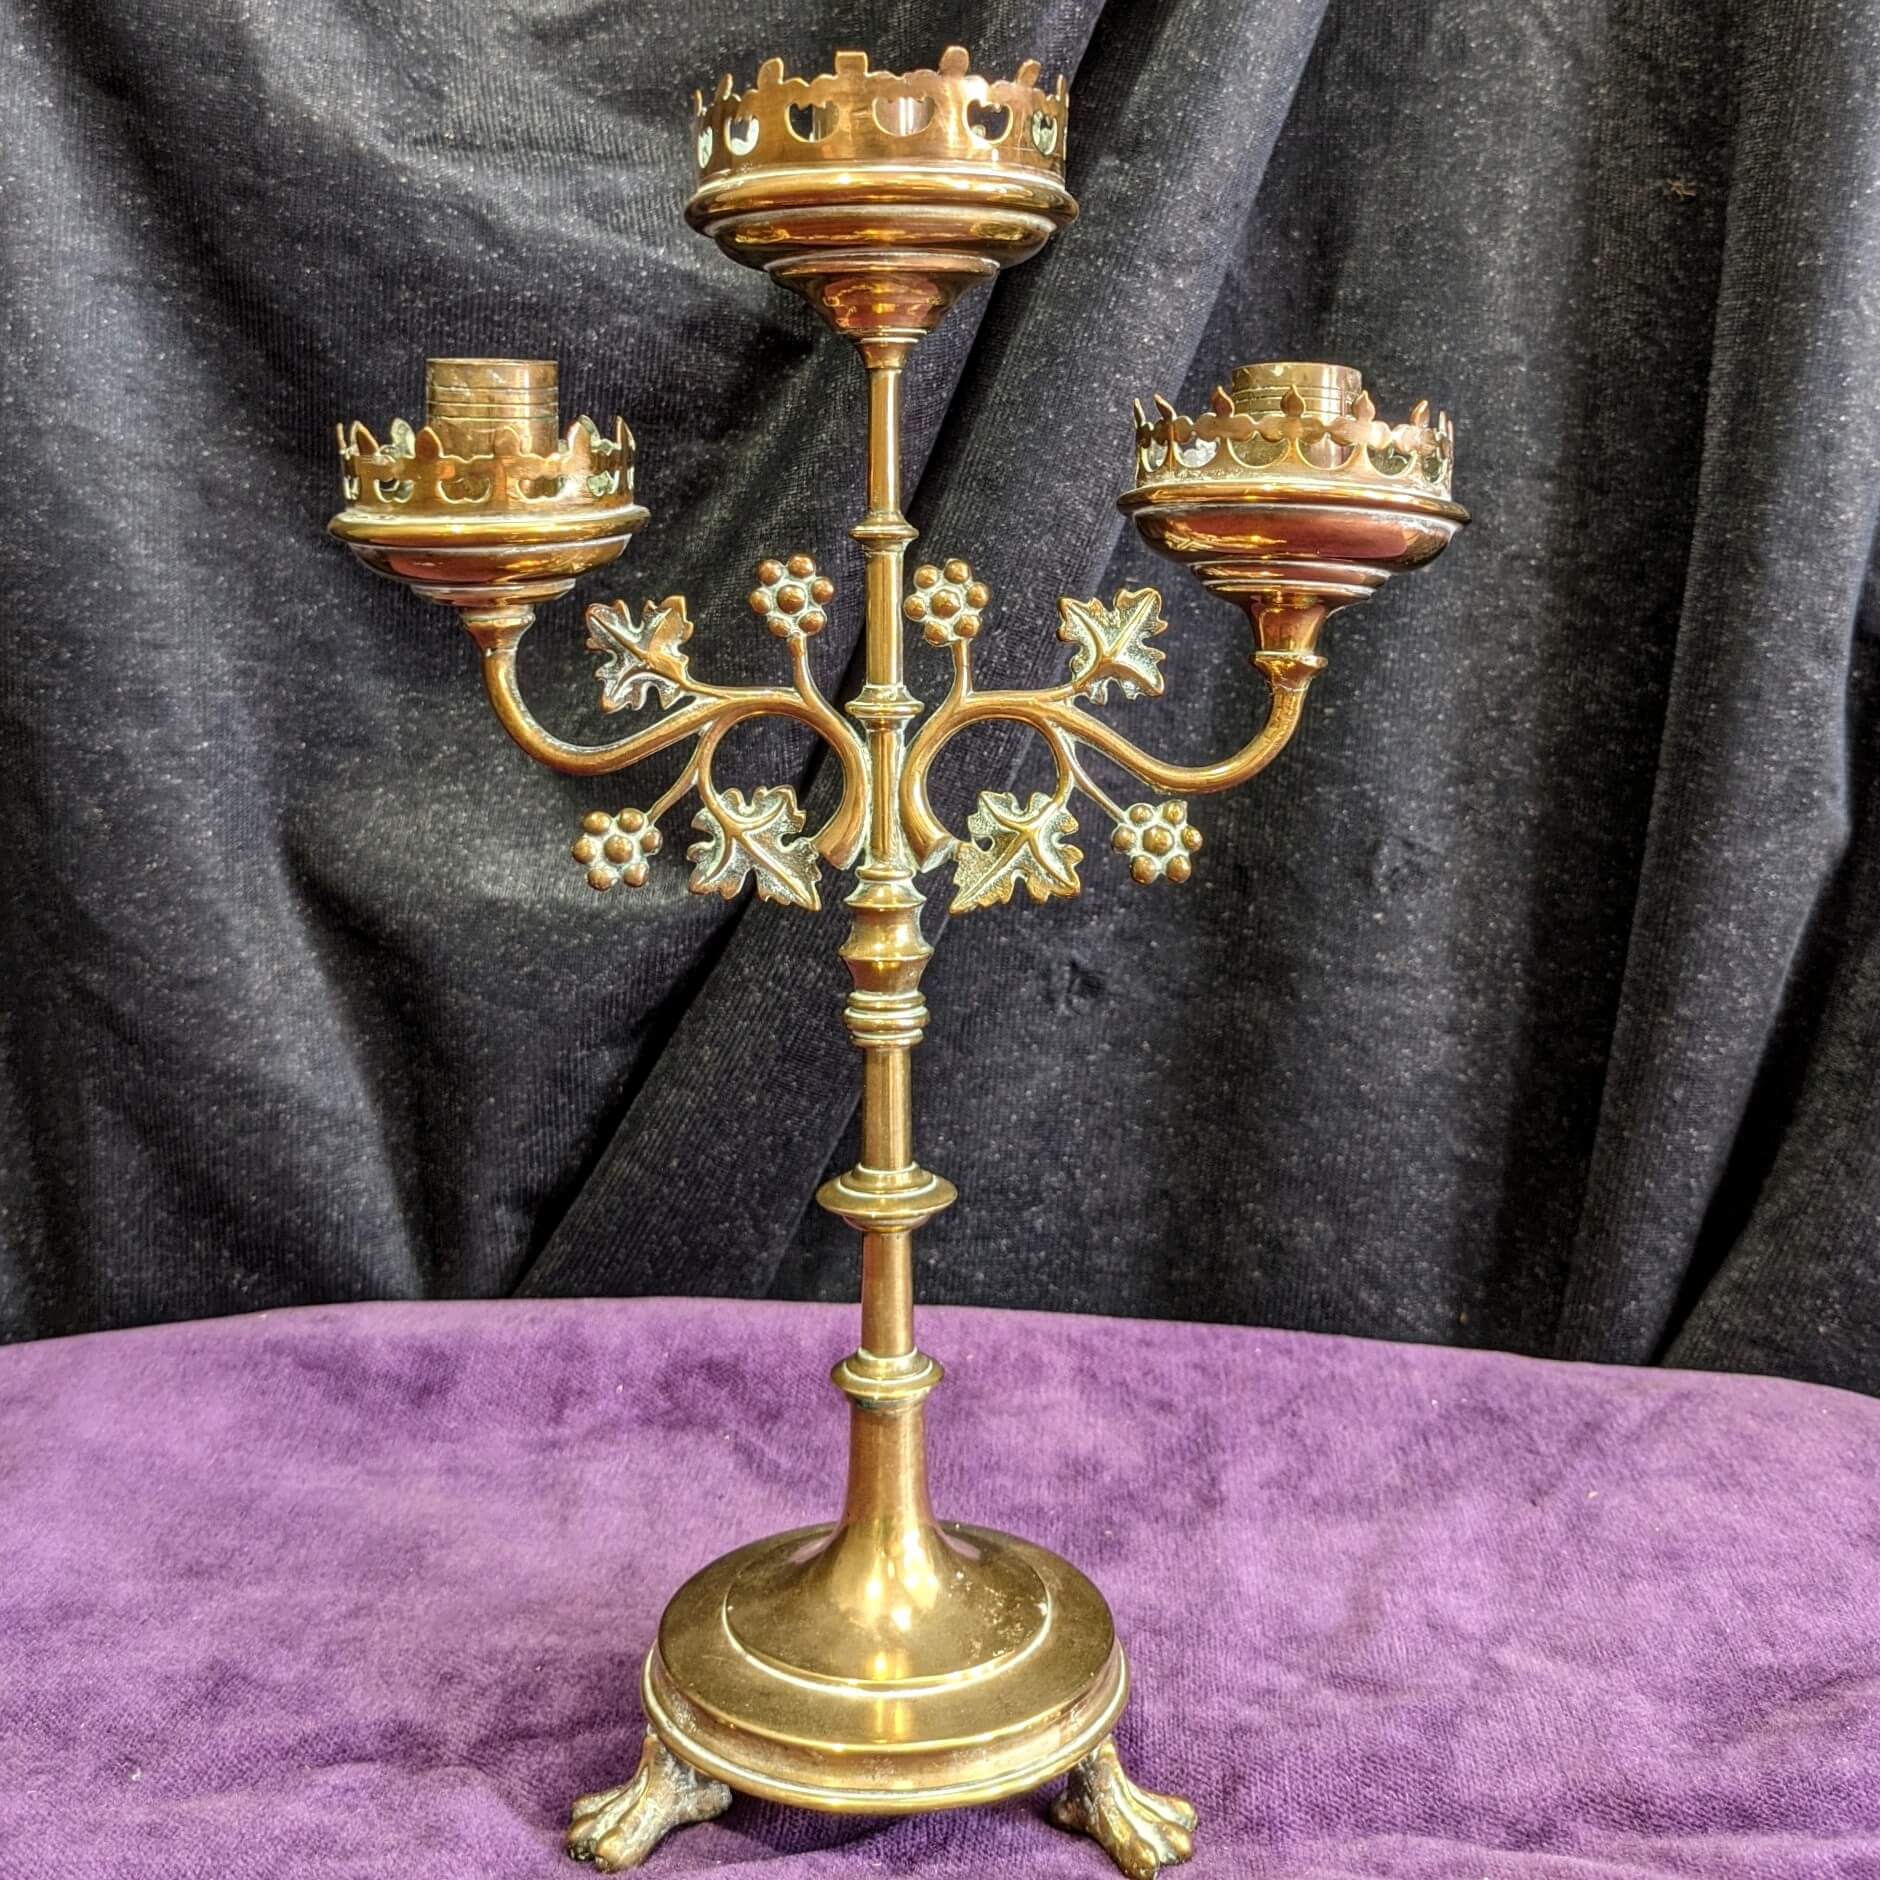 Exquisite 19th Century Gothic Revival Brass Candelabra with Three Candle  Sockets (SOLD) - Antique Church Furnishings